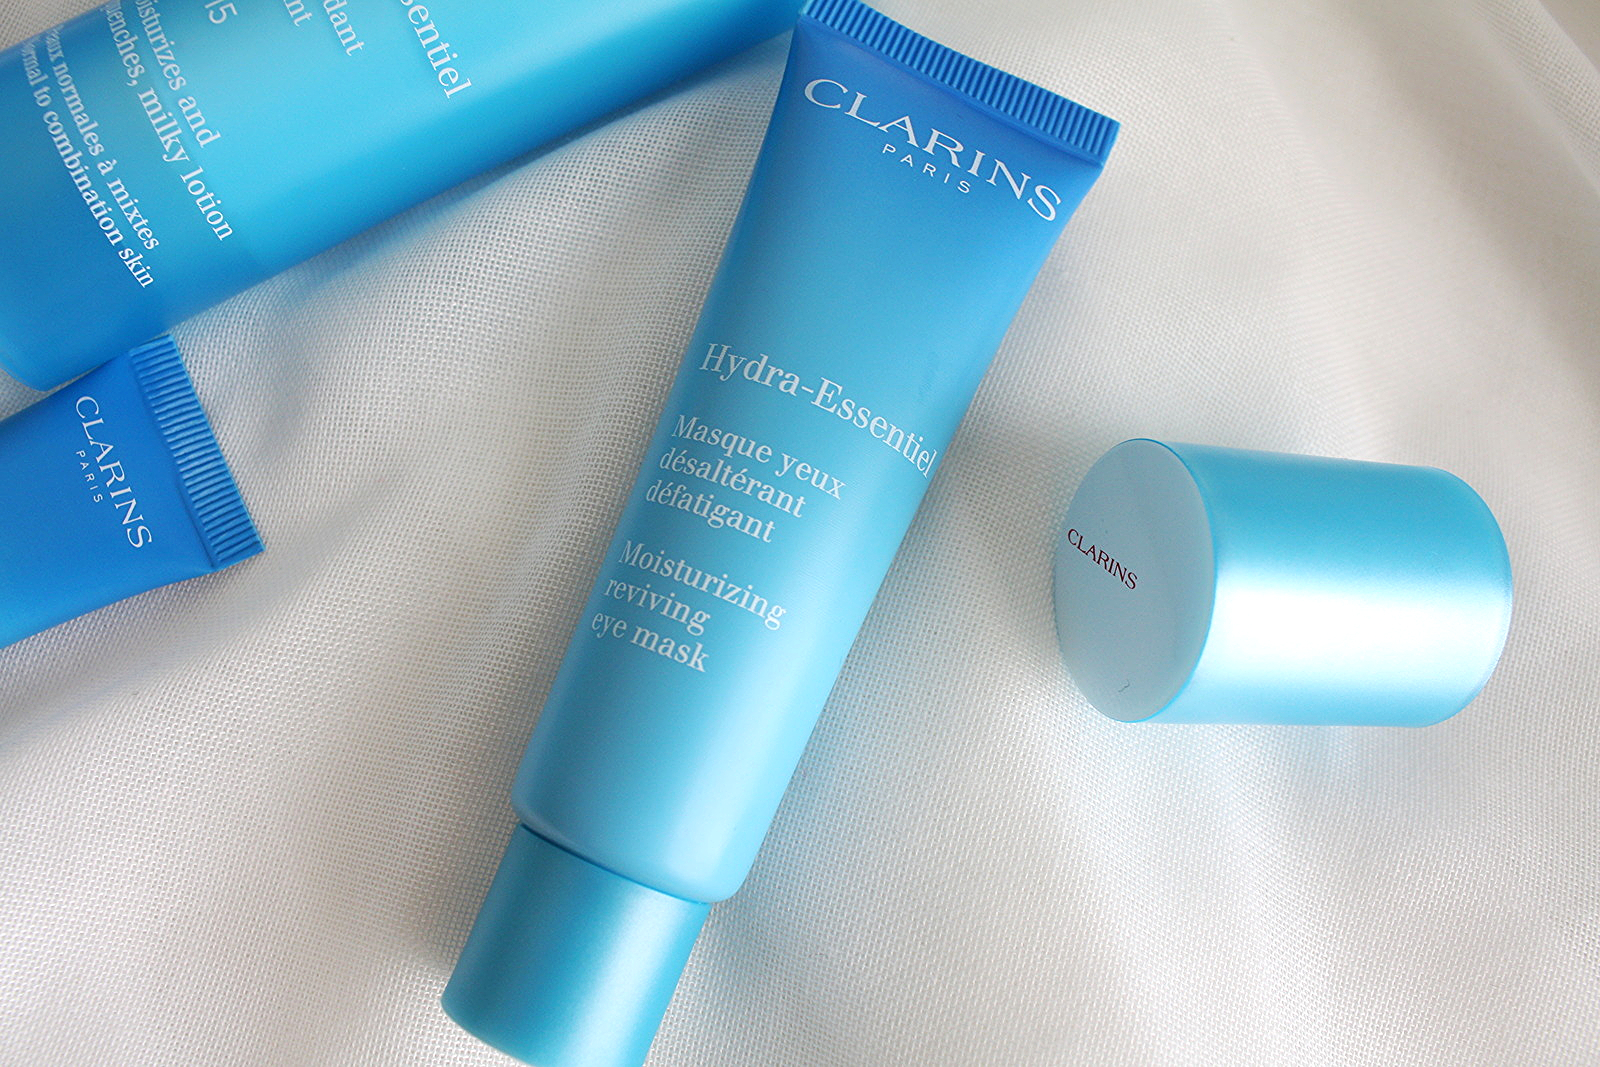 SKINCARE TESTING WITH CLARINS